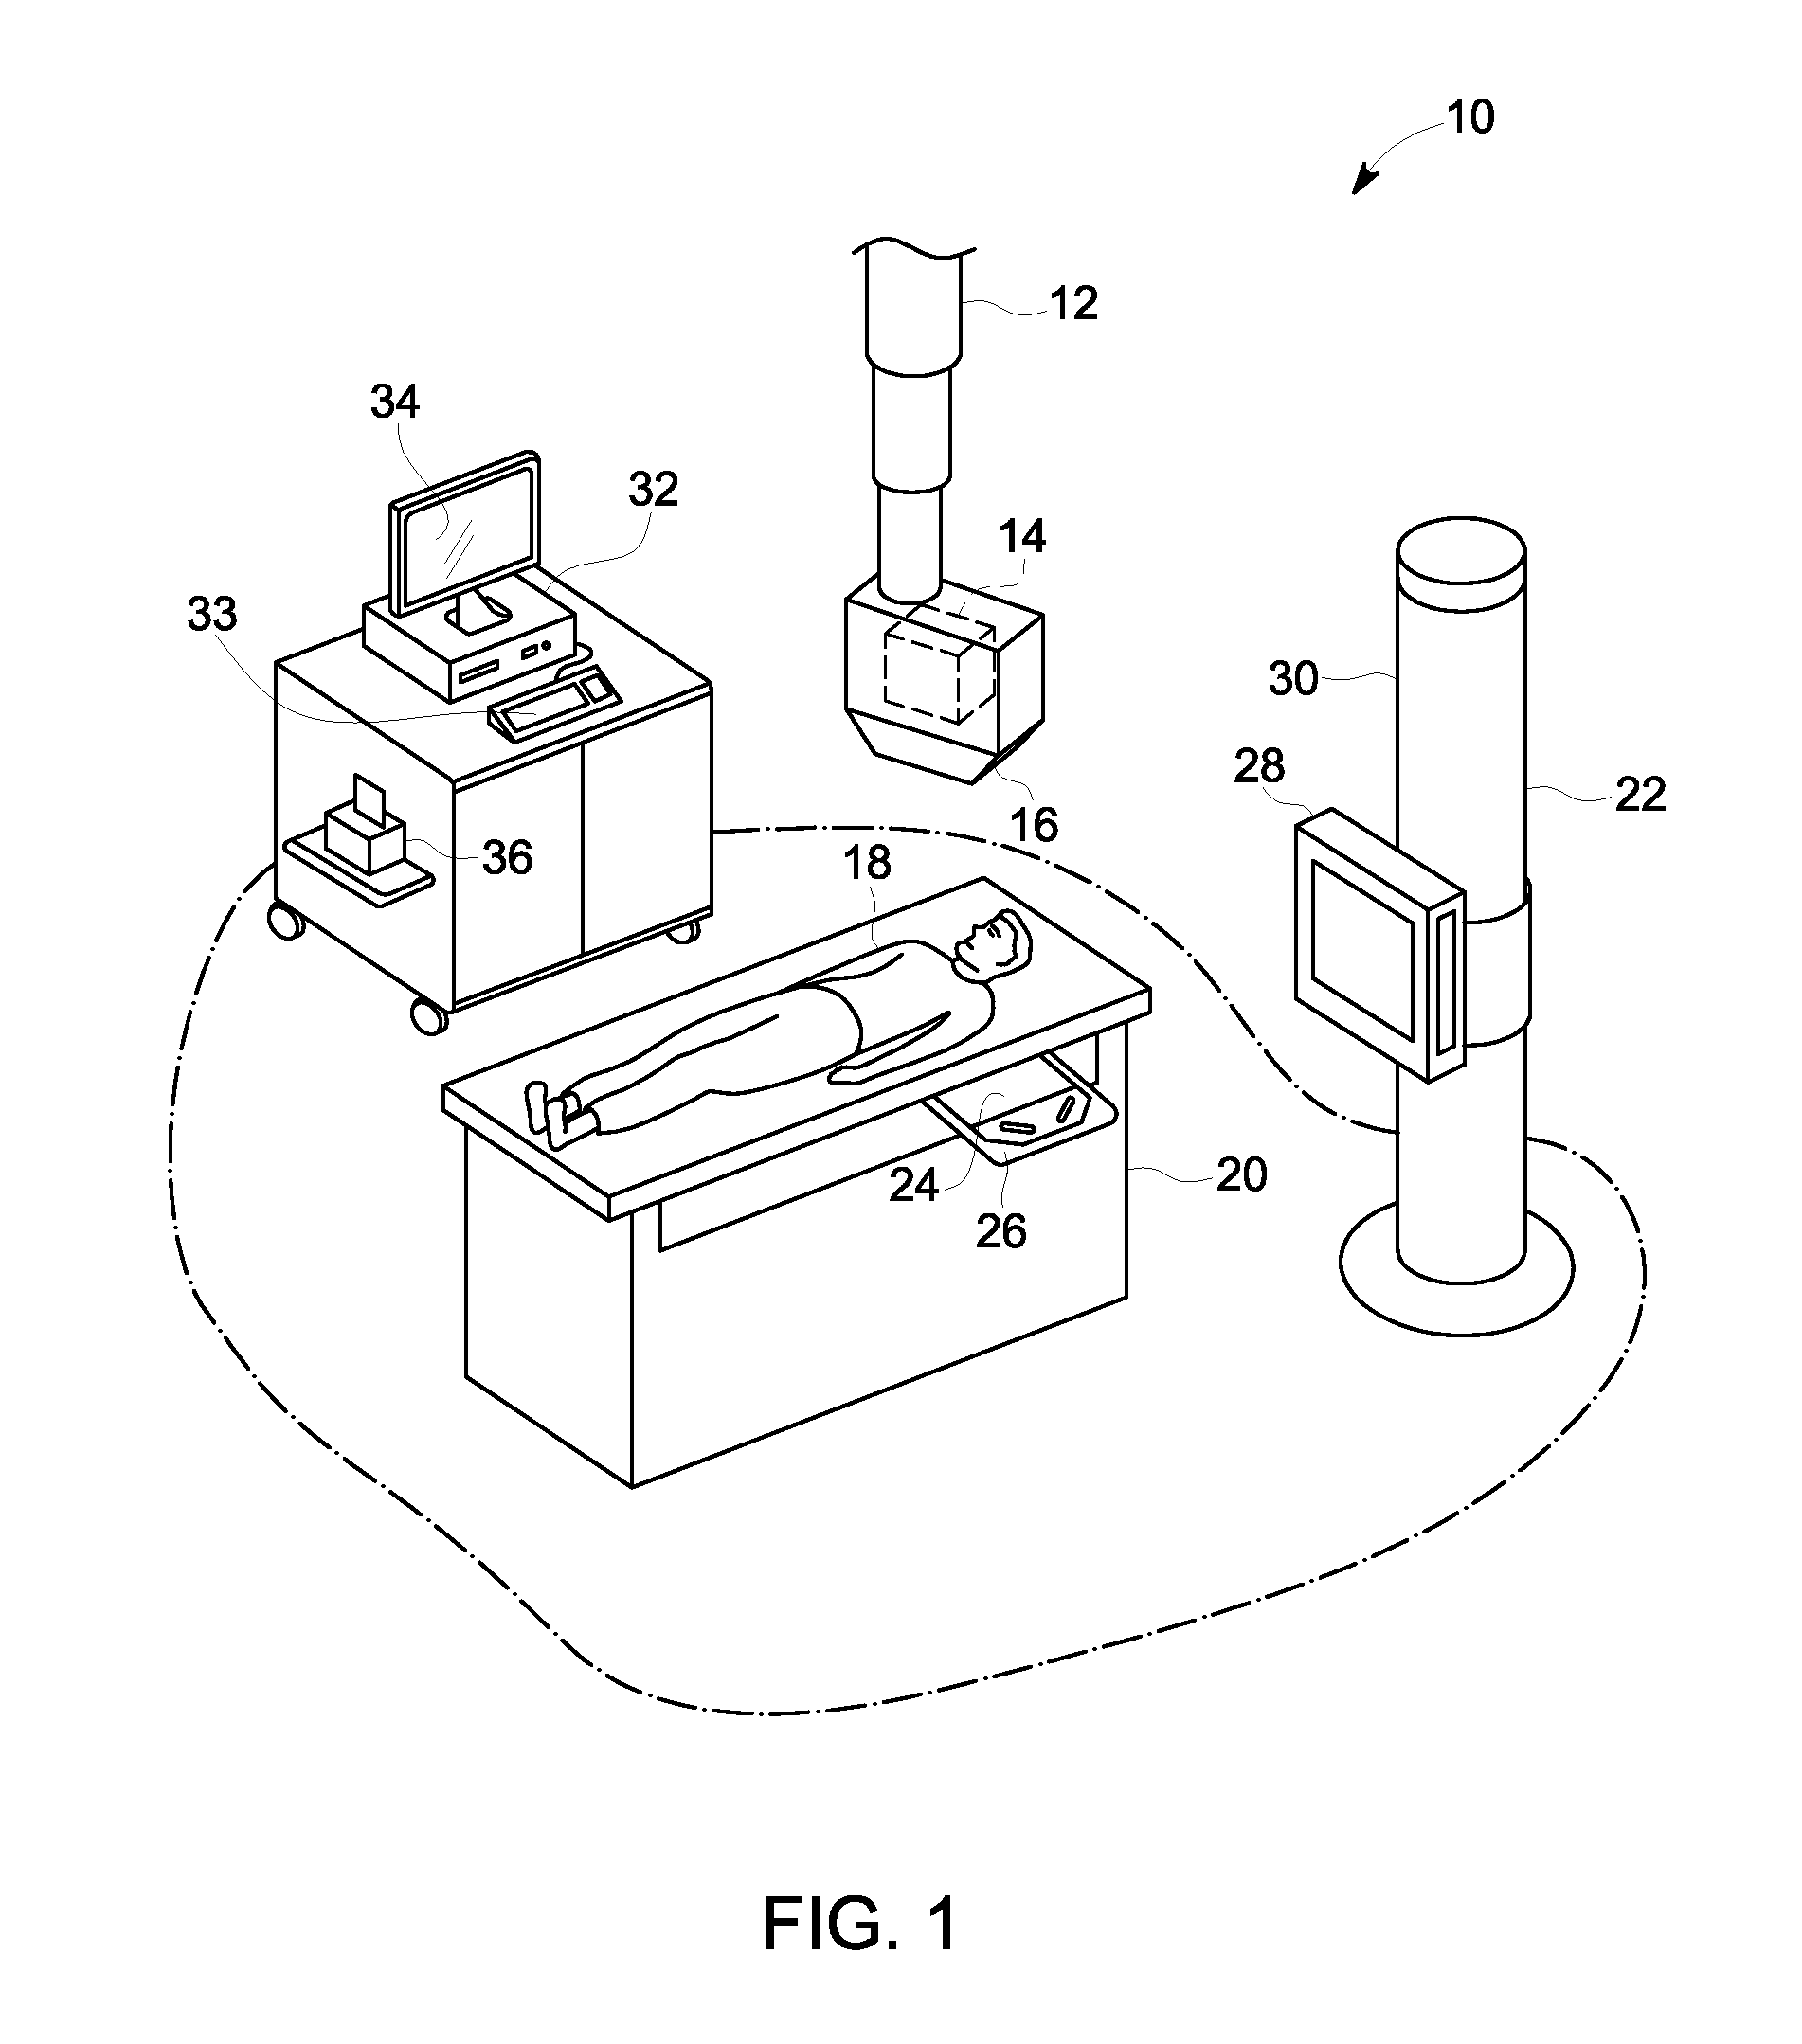 Power and communication interface between a digital X-ray detector and an X-ray imaging system